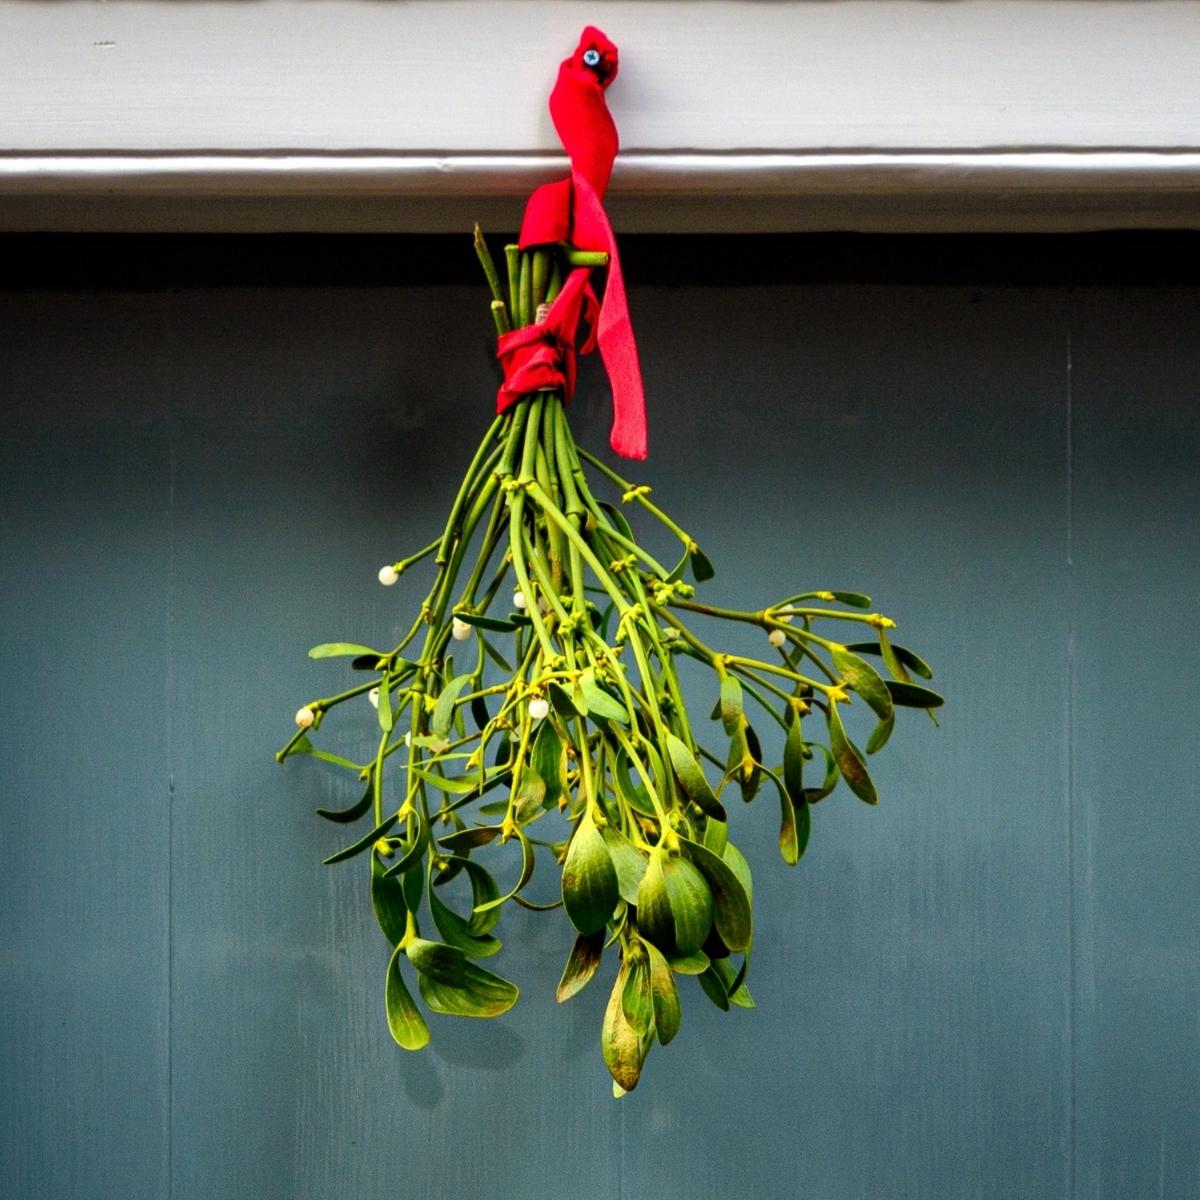 mistletoe-the-legend-of-the-famous-kissing-plant-featured